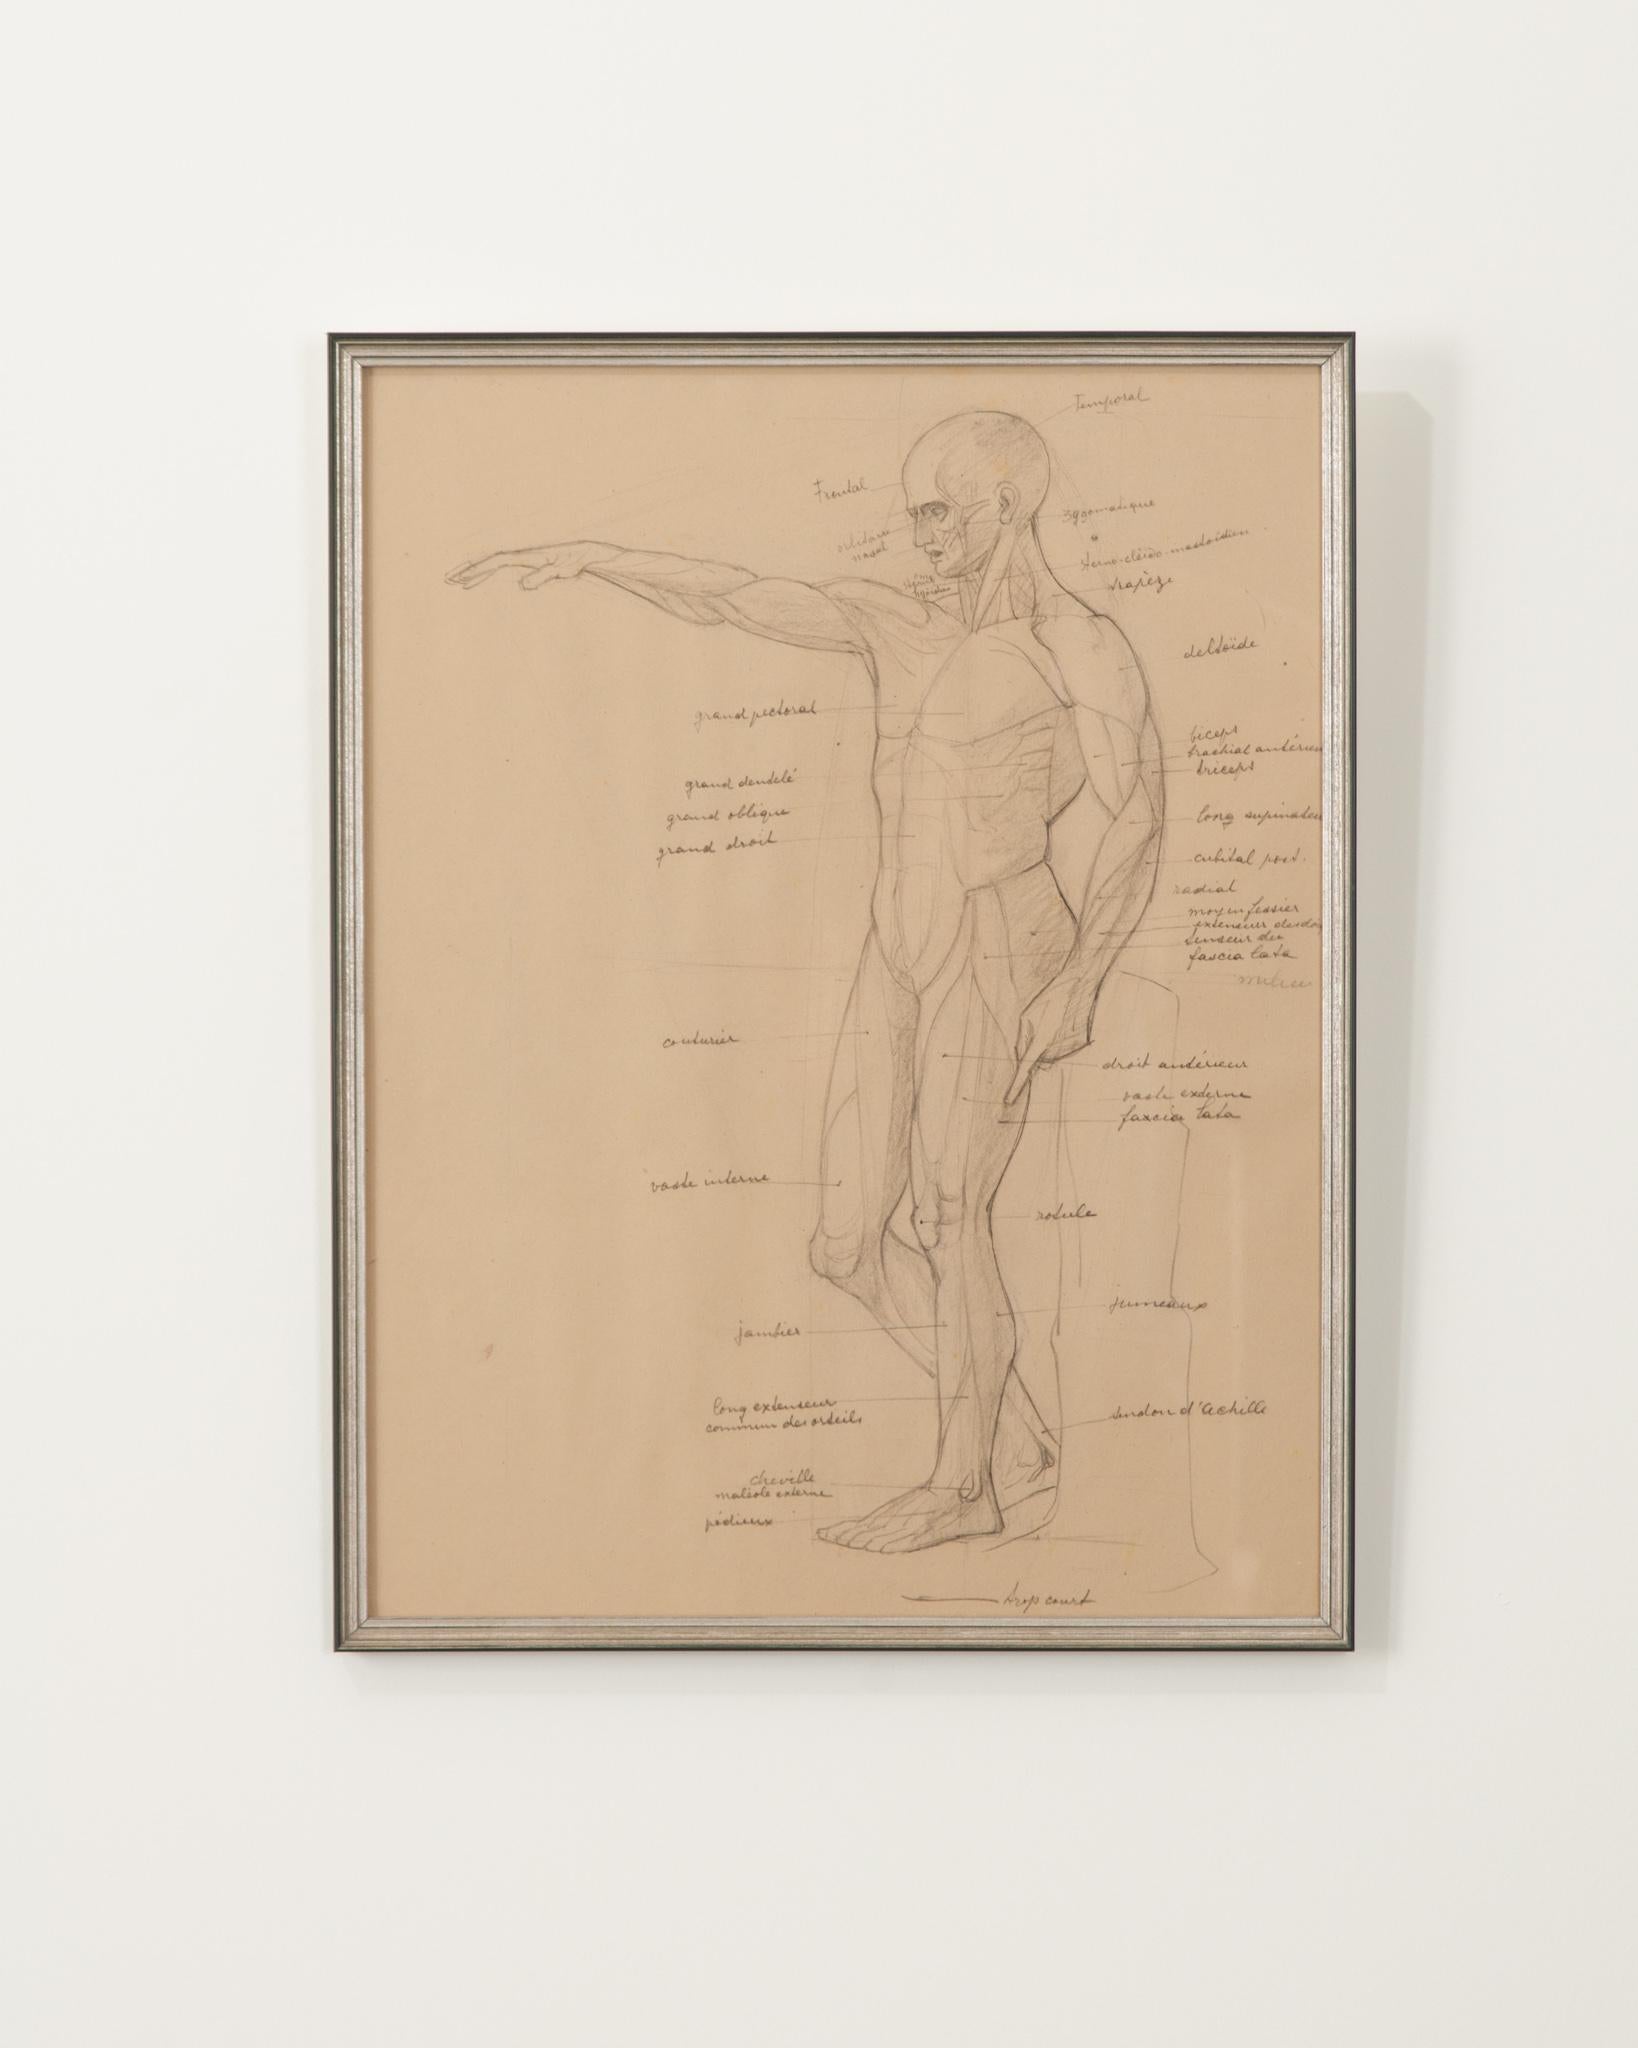 Elevate any space with this unique hand-drawn work of art. Done with pencil on paper- this is an anatomically correct excerpt from a student's figure study sketchbook from the early 20th century. Purchased in France, it has been recently